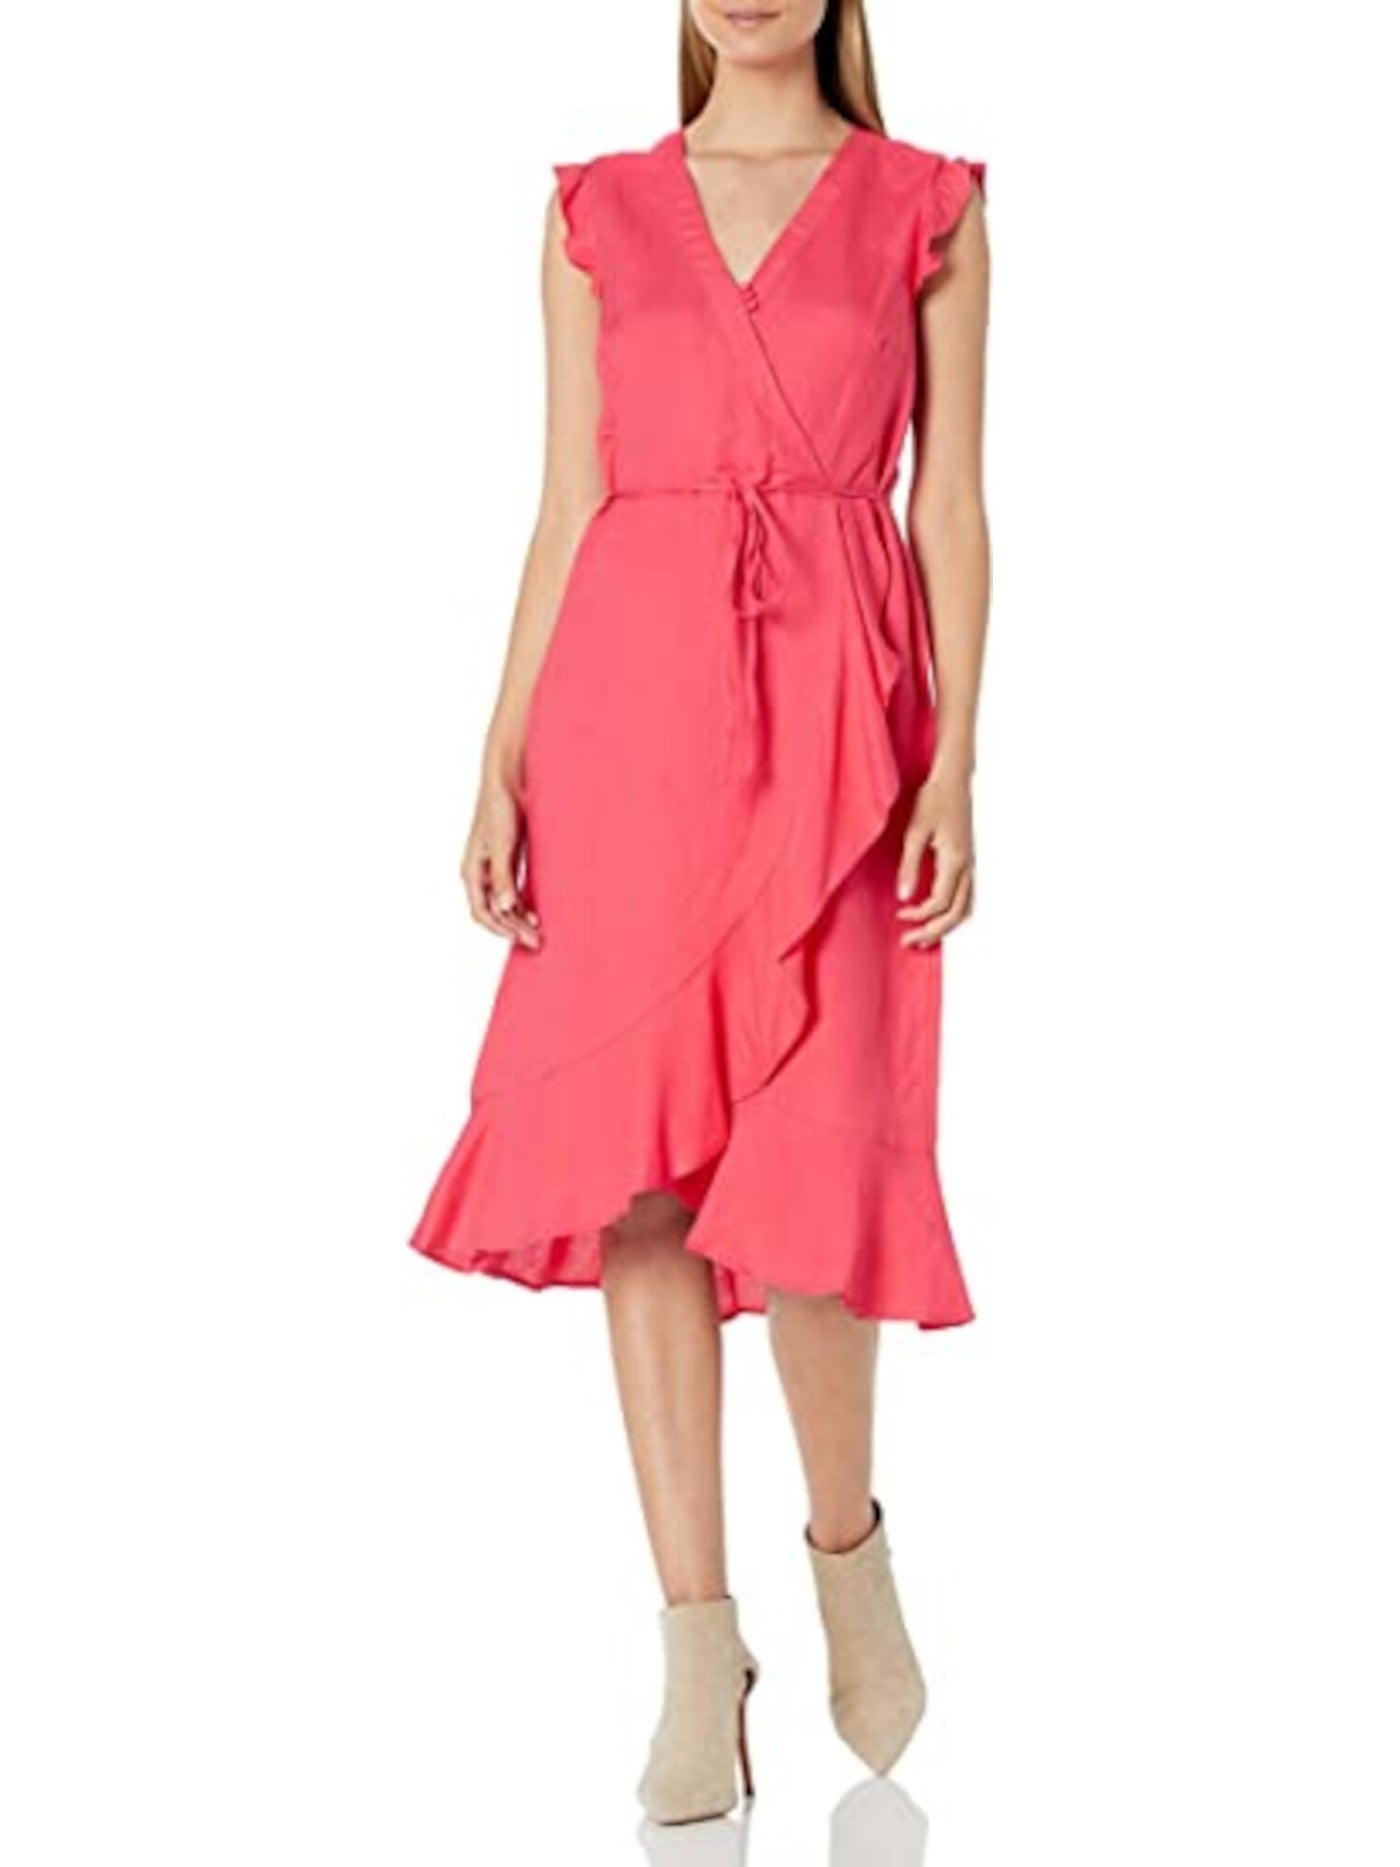 KARL LAGERFELD Womens Coral Ruffled Zippered Sleeveless V Neck Knee Length Cocktail Faux Wrap Dress 14